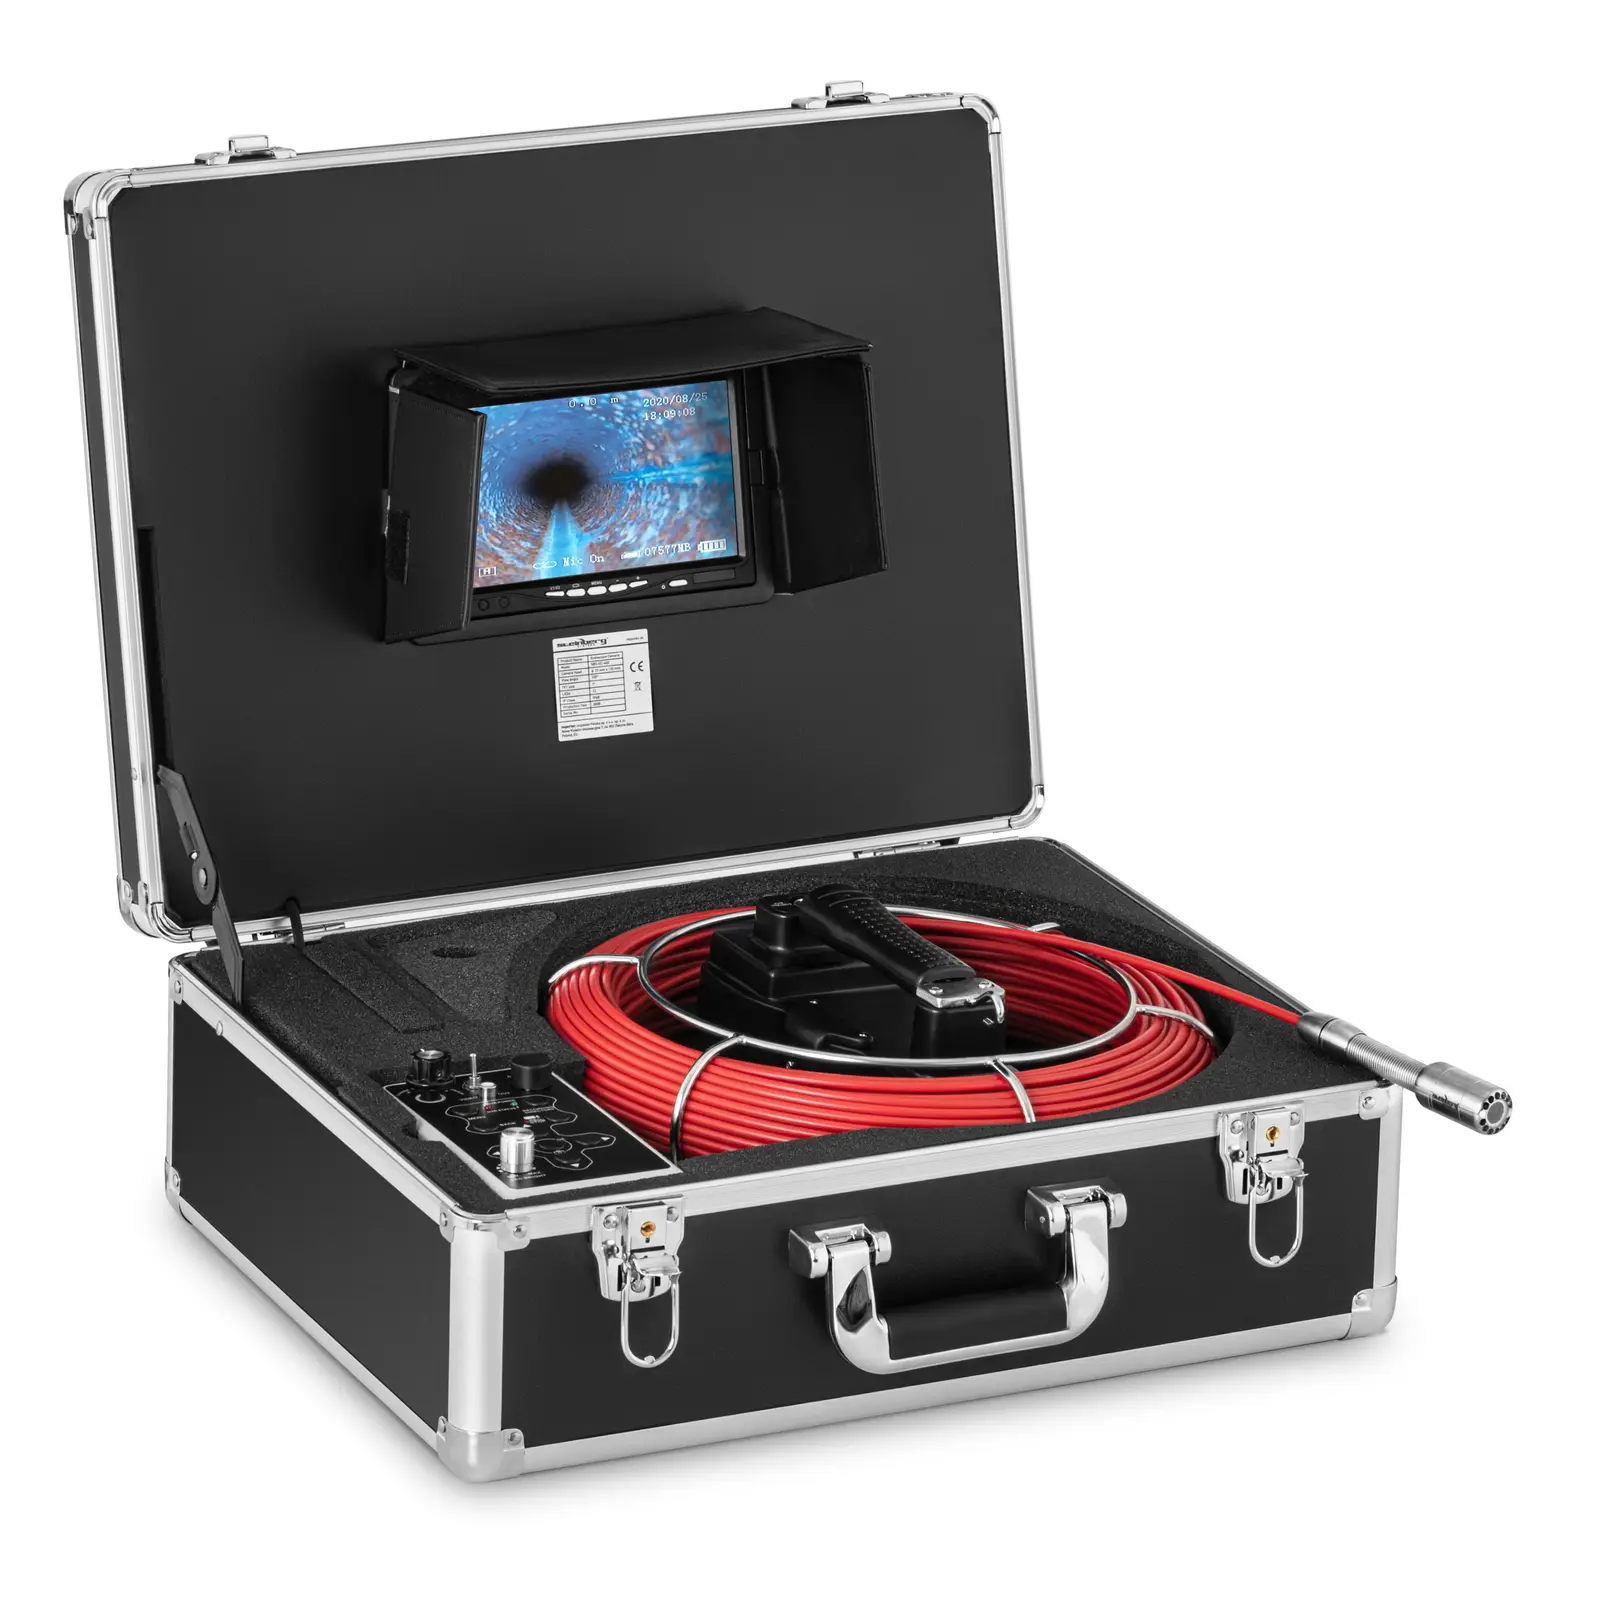 Endoscope Camera 50 m 12 Leds 7" Display - Endoscopes Inspection Cameras by Steinberg Systems